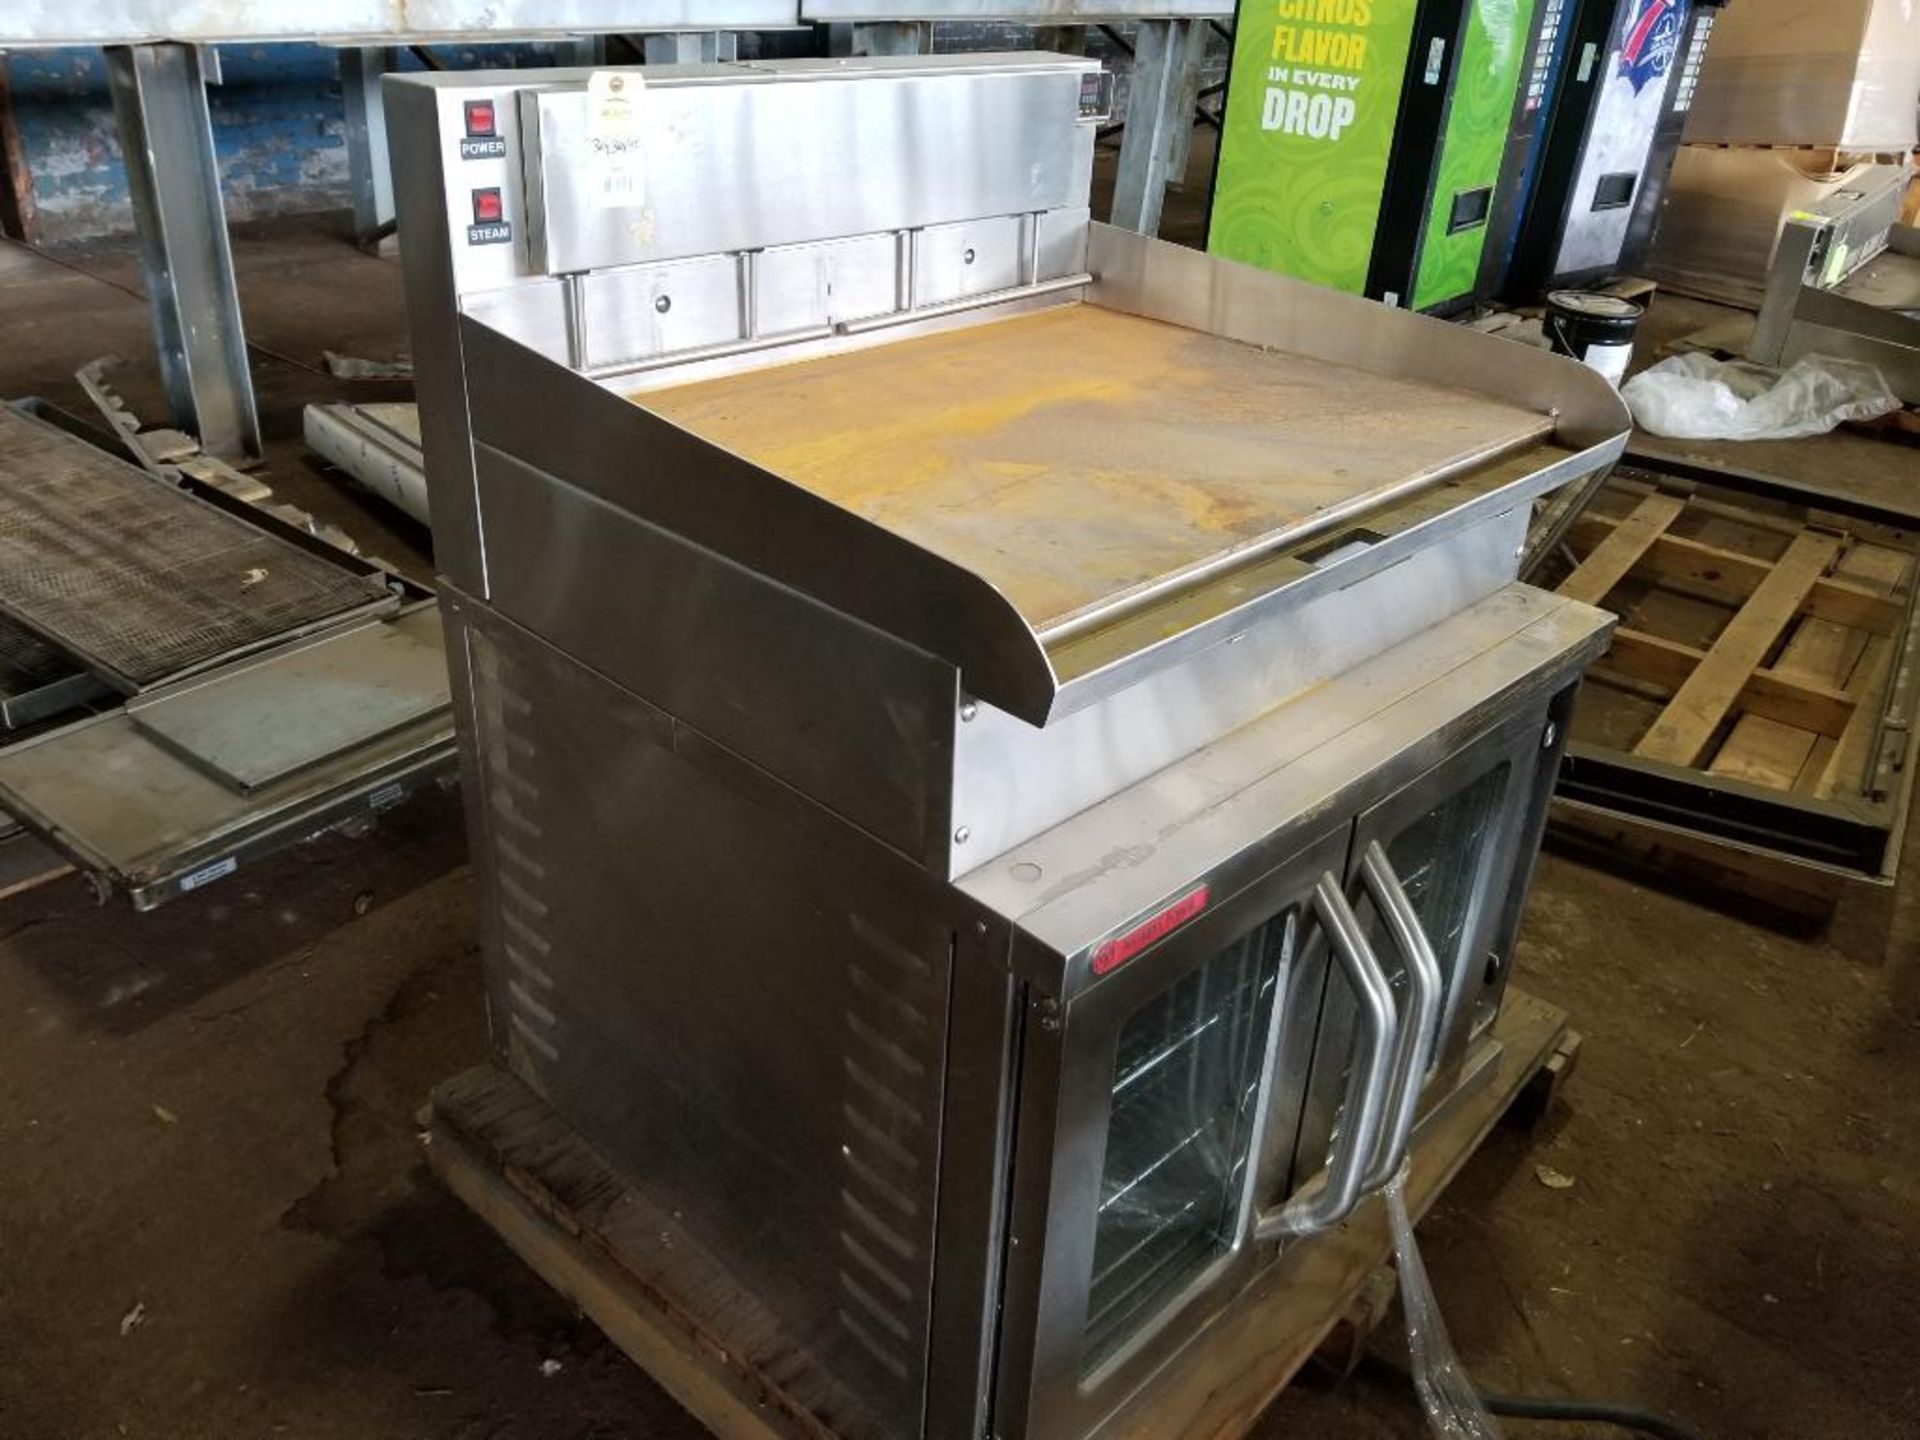 Market Forge Industries INC. 2600-HPE oven. 208V, 11kW, 3PH. American Griddle Corp. 3TT-GD griddle.